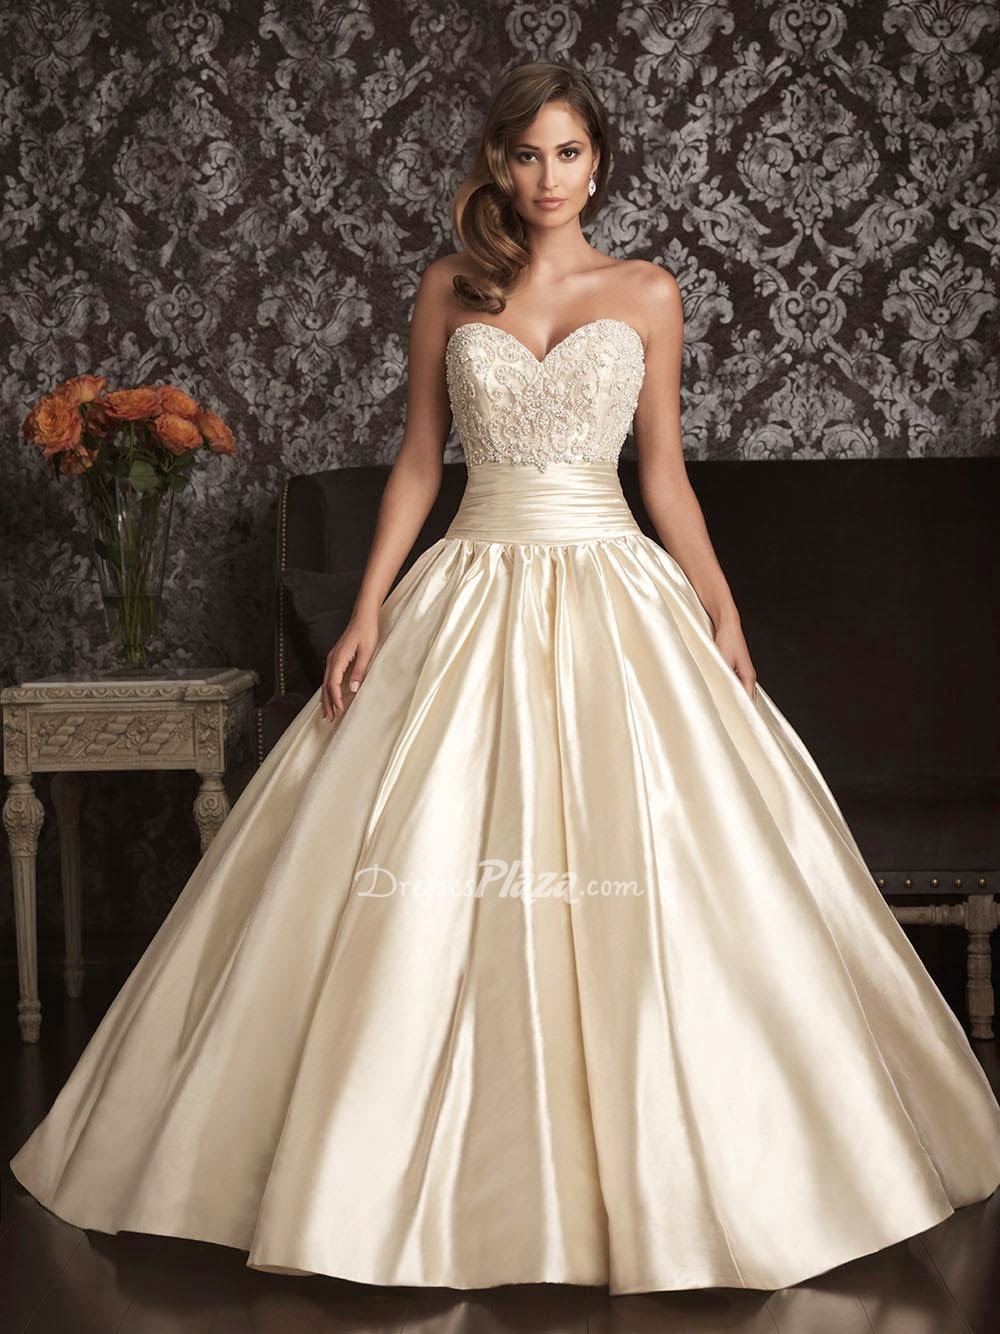 Ball Gown Sweetheart Strapless Embroidered Beaded Bodice Wedding Dress-1